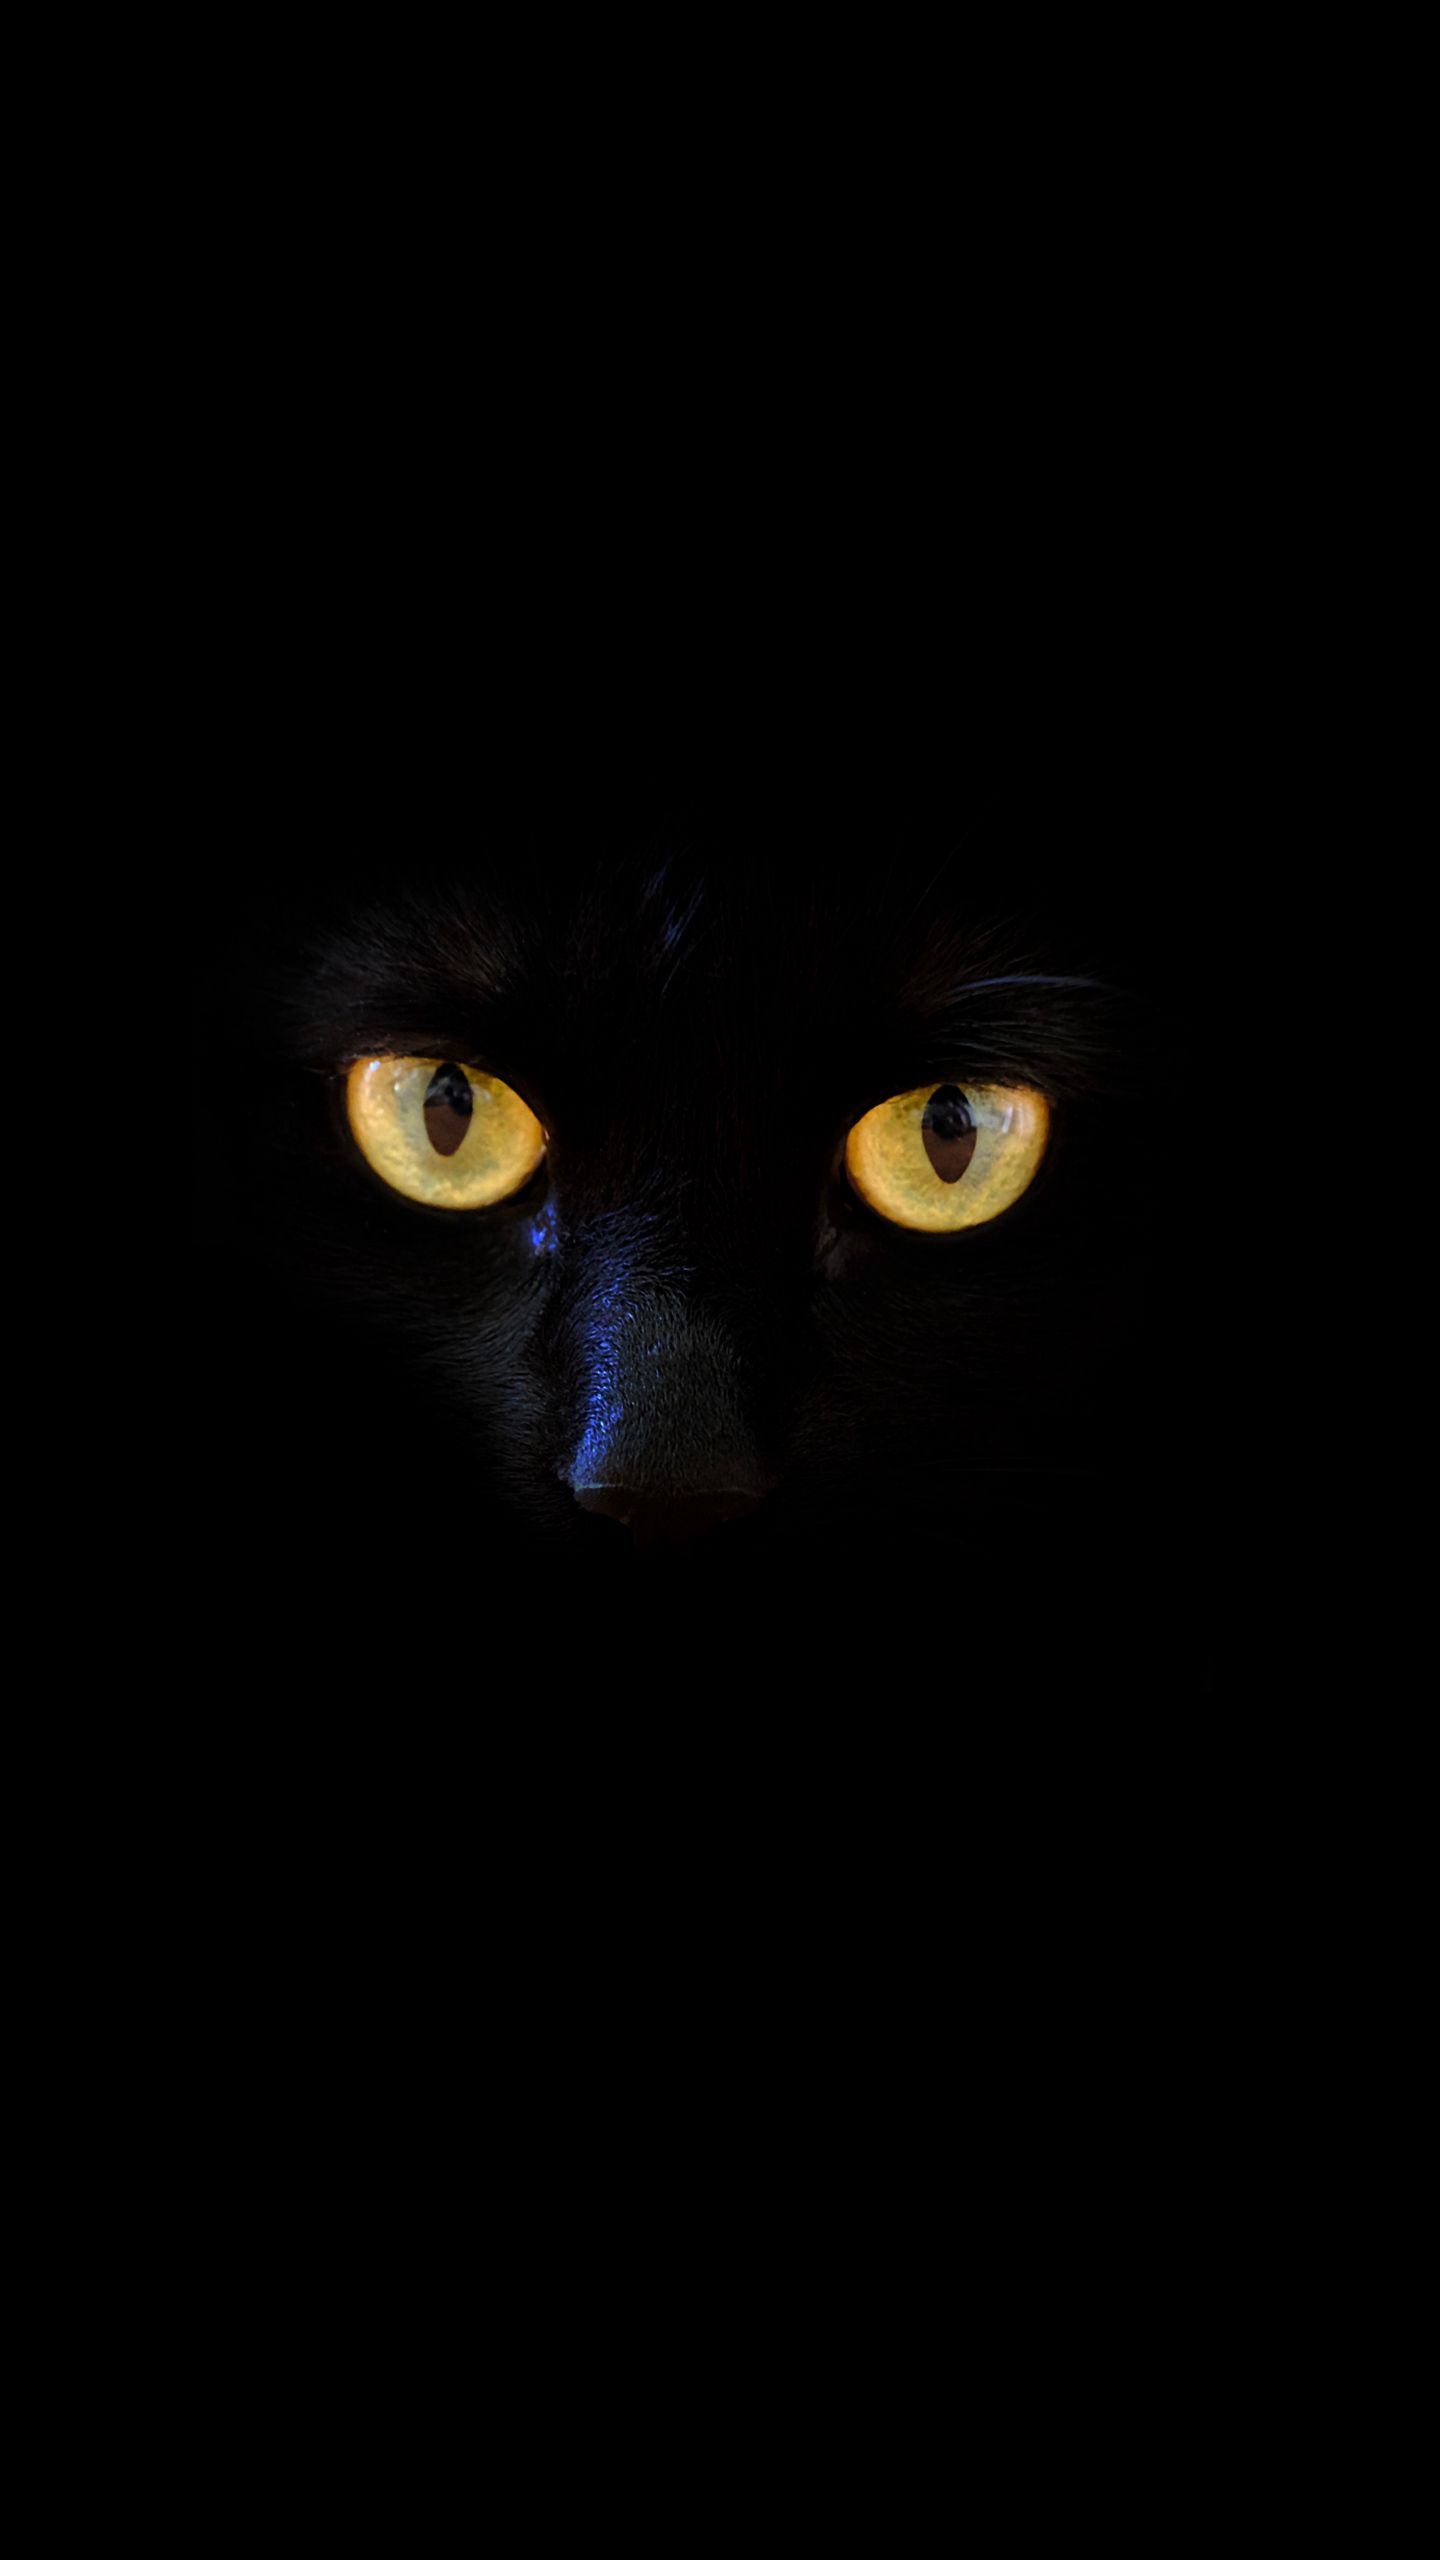 Black Cat Galaxy Wallpapers on